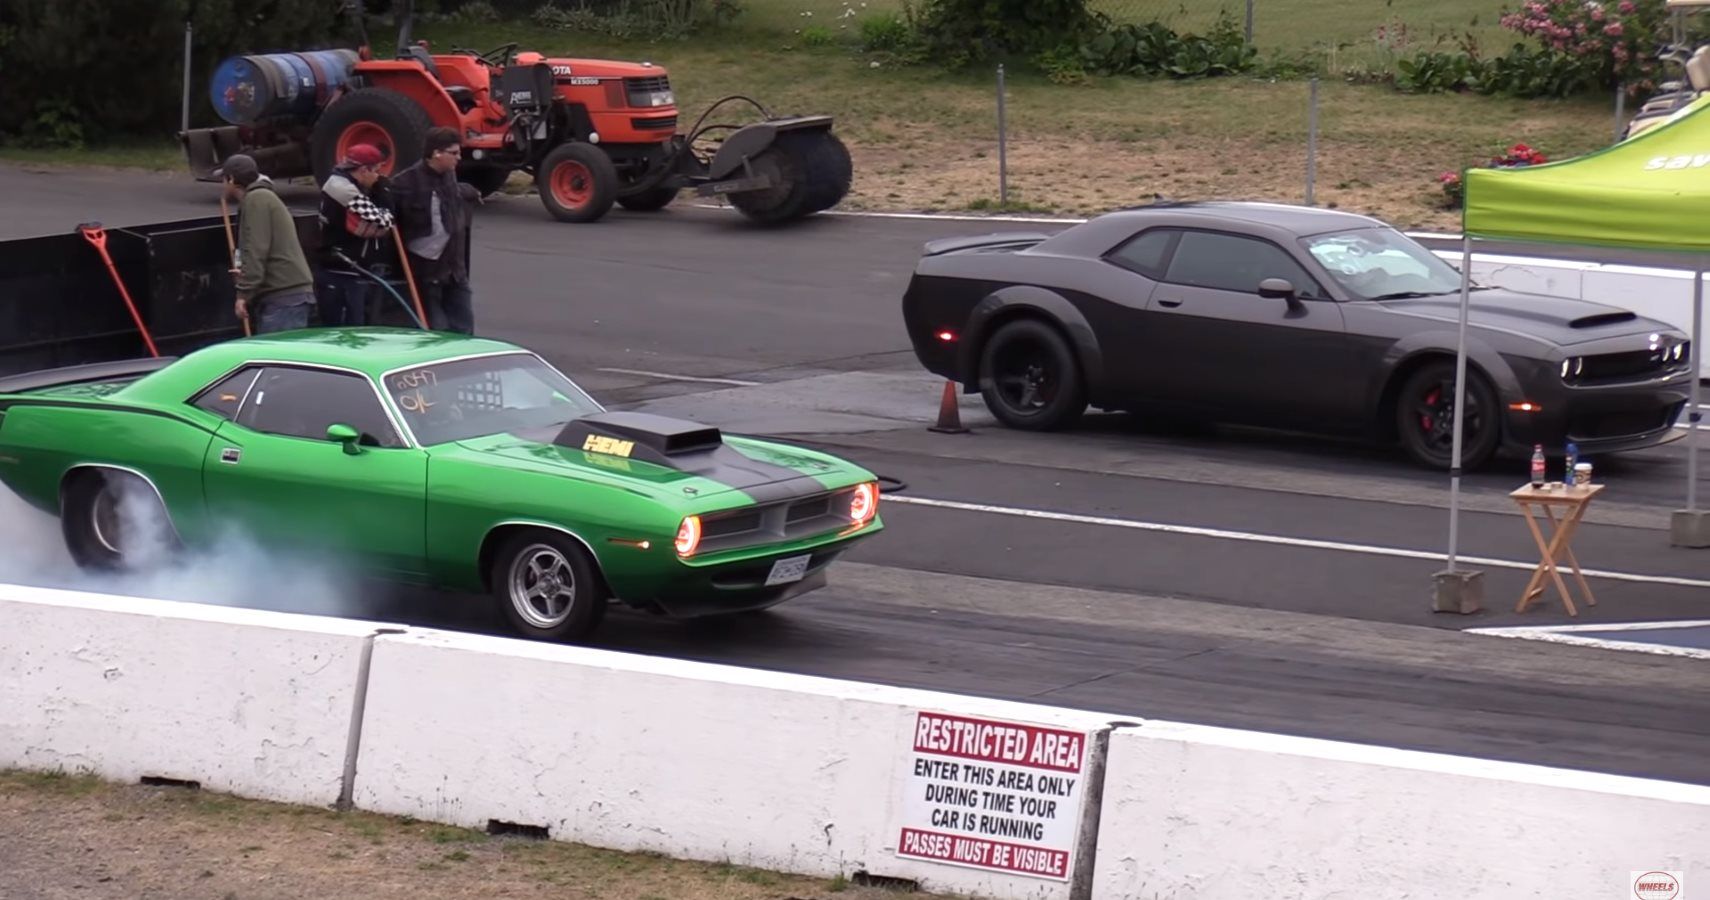 Watch: Dodge Demon, Plymouth Barracuda, Mustang Shelby, Hellcat, & Dodge Charger Race In Drag Action